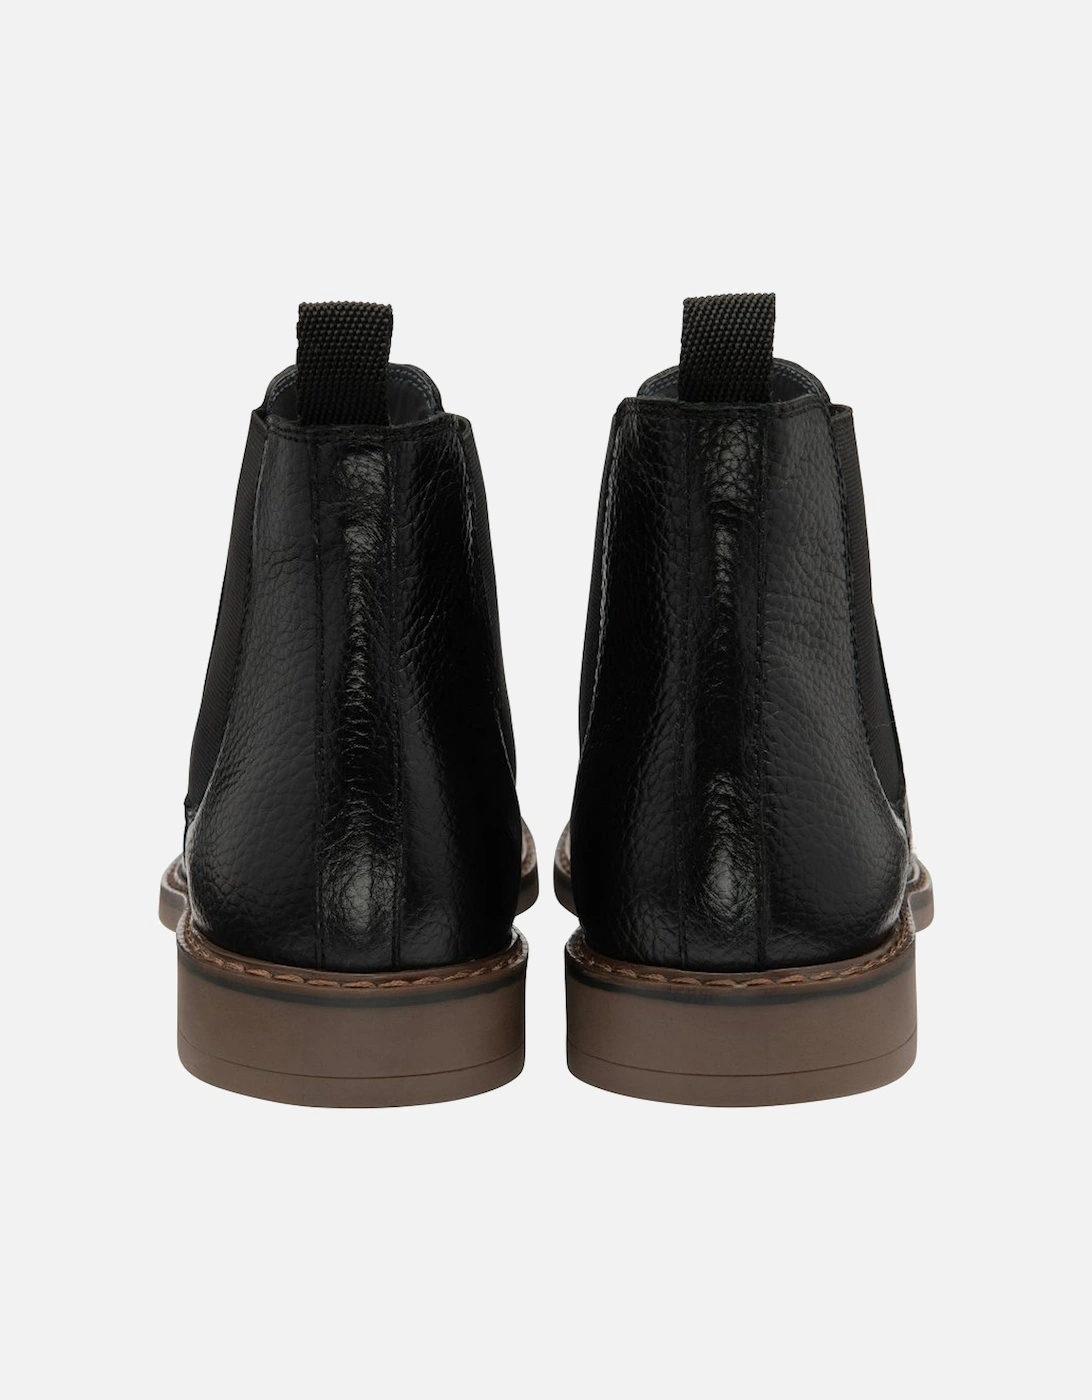 Hall Mens Chelsea Boots